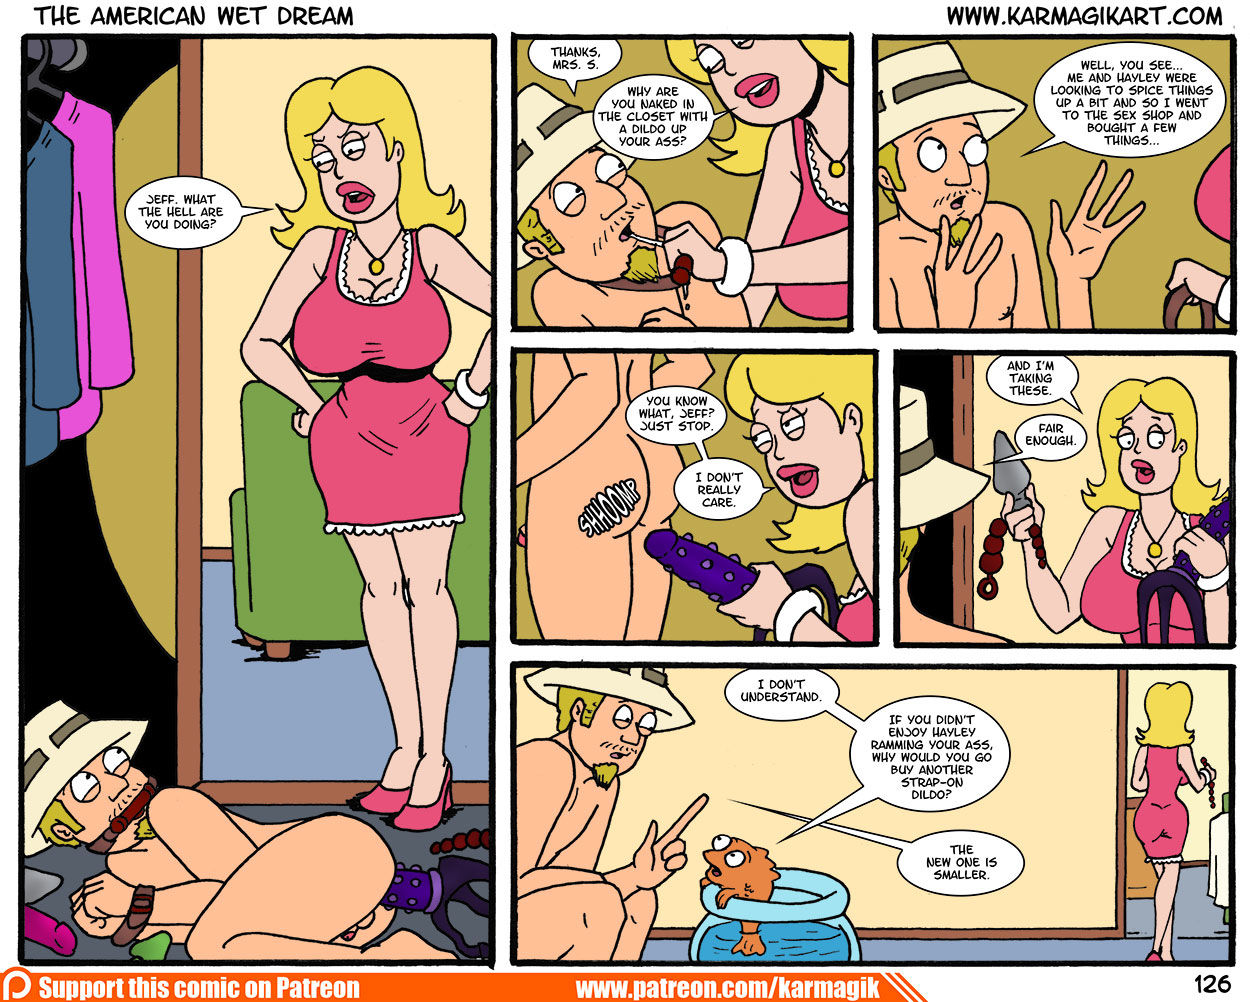 The American Wet Dream (American Dad) page 125